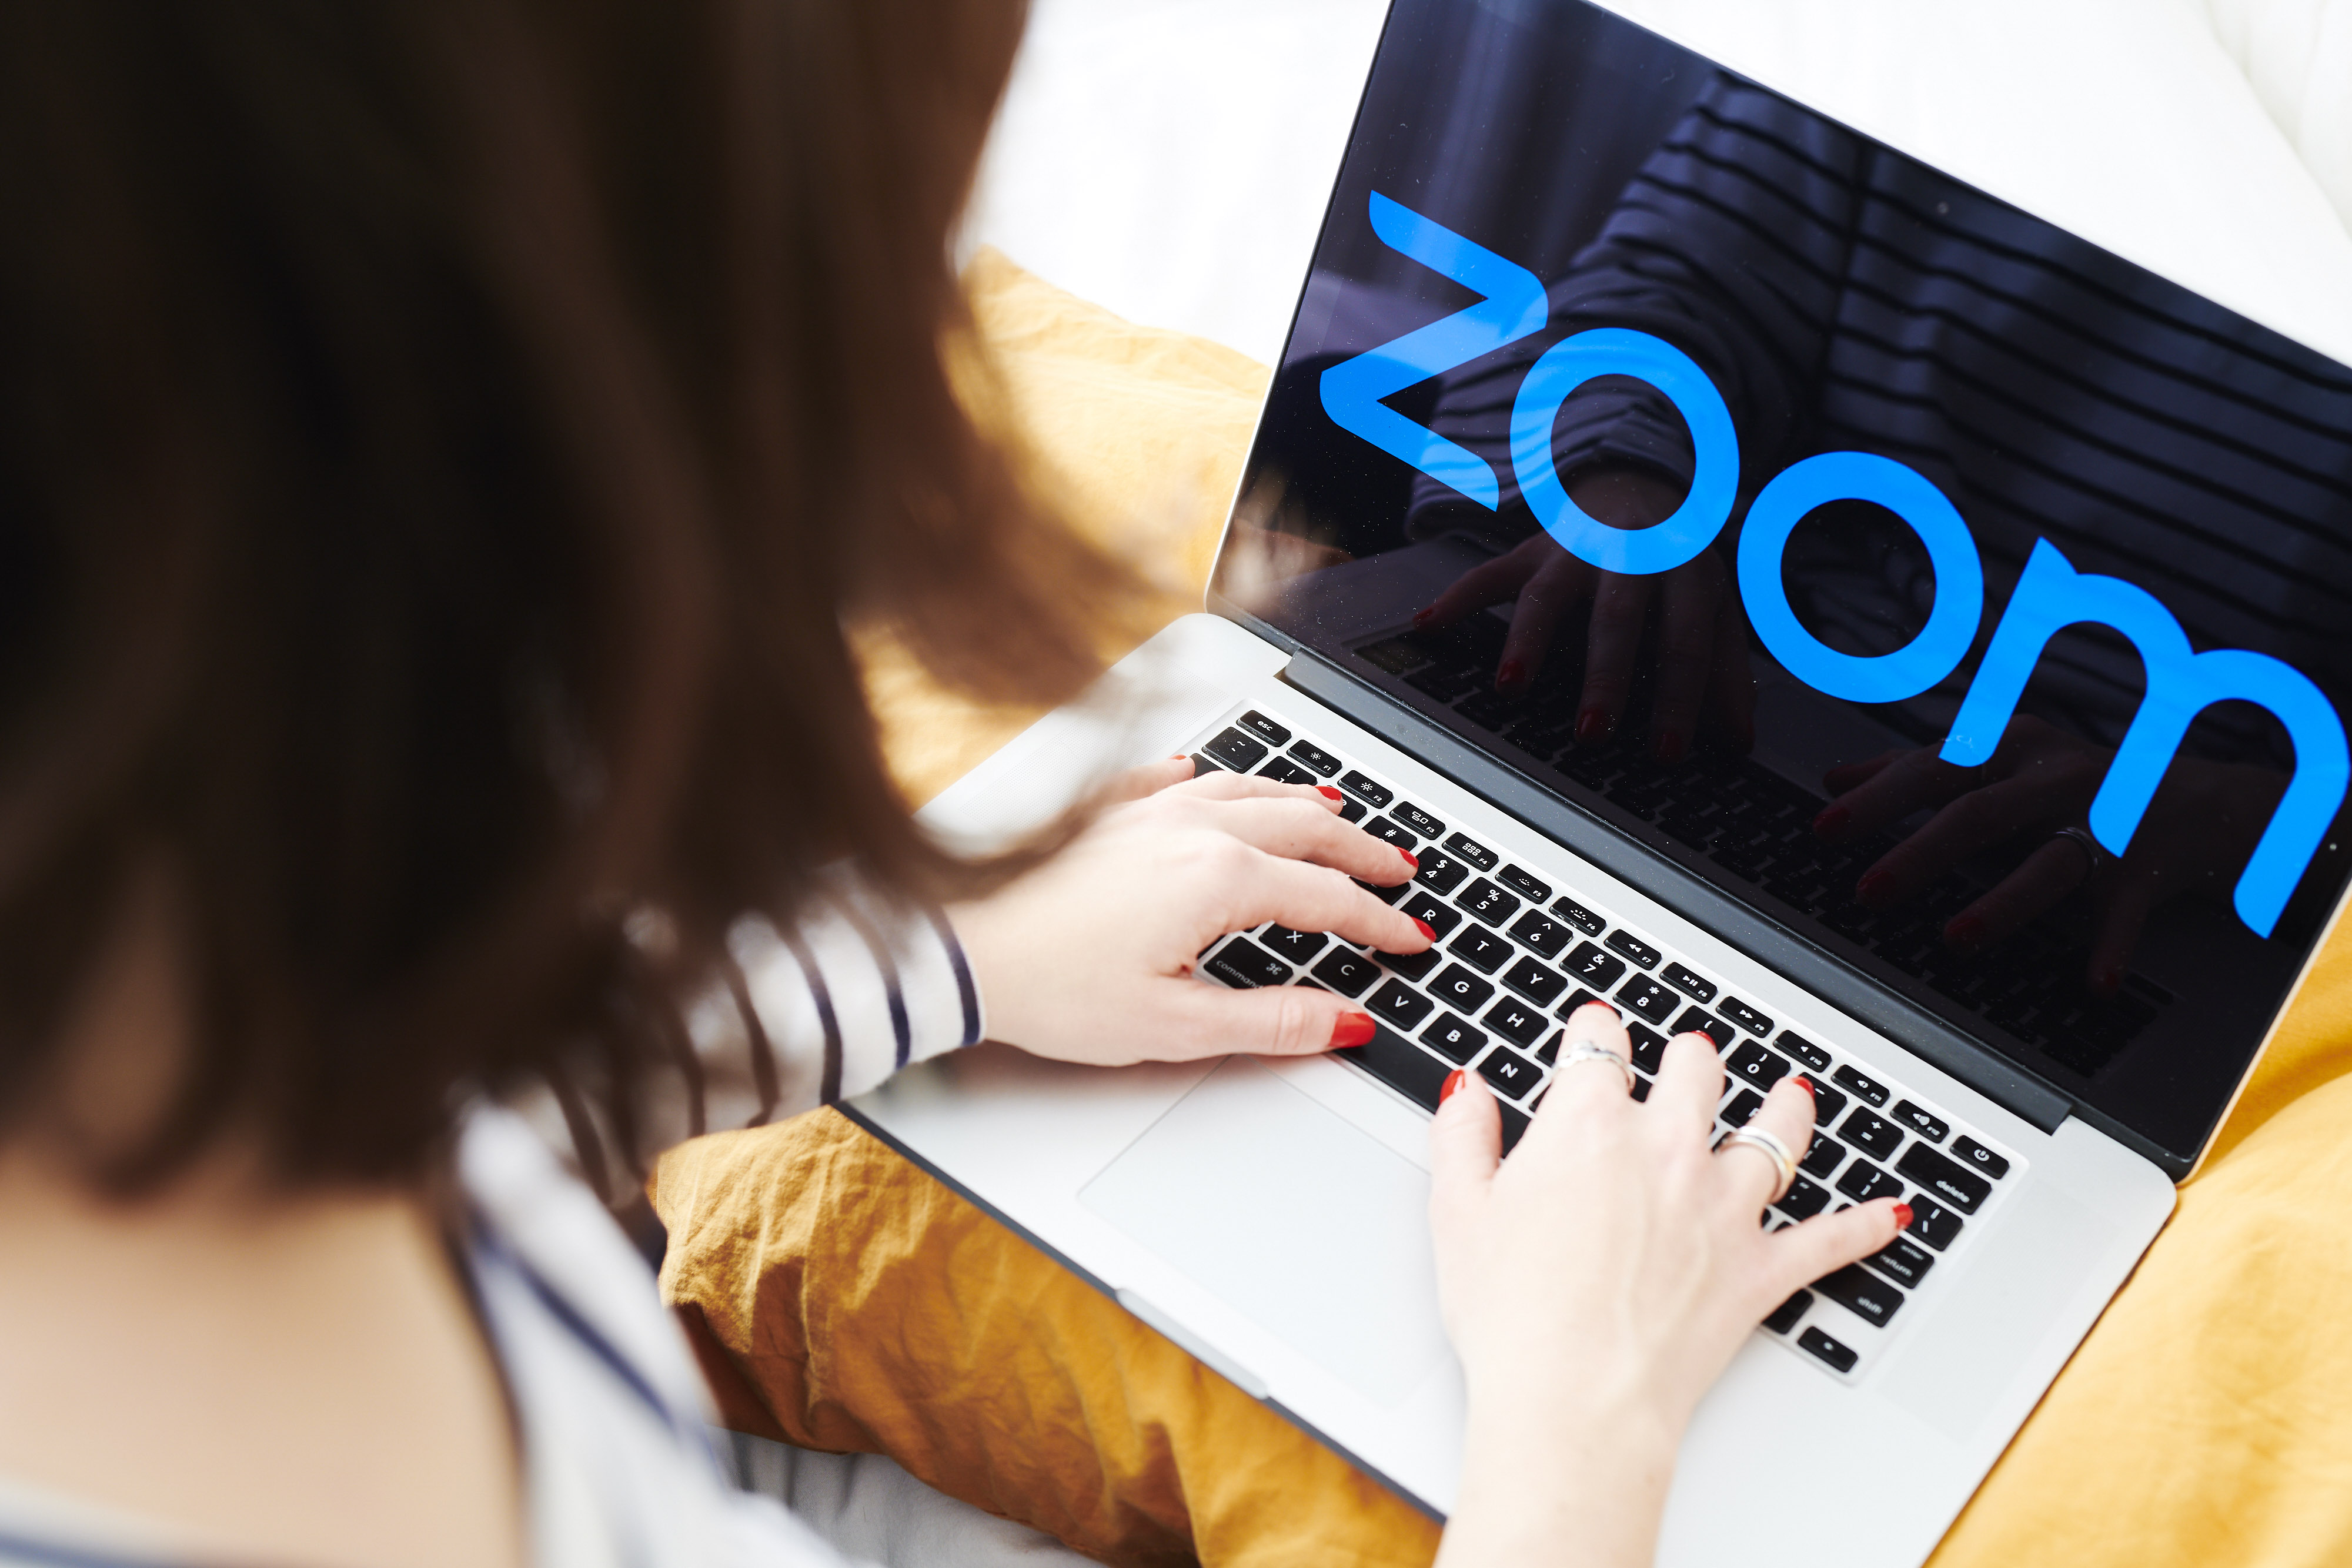 The logo for the Zoom Video Communications Inc. application